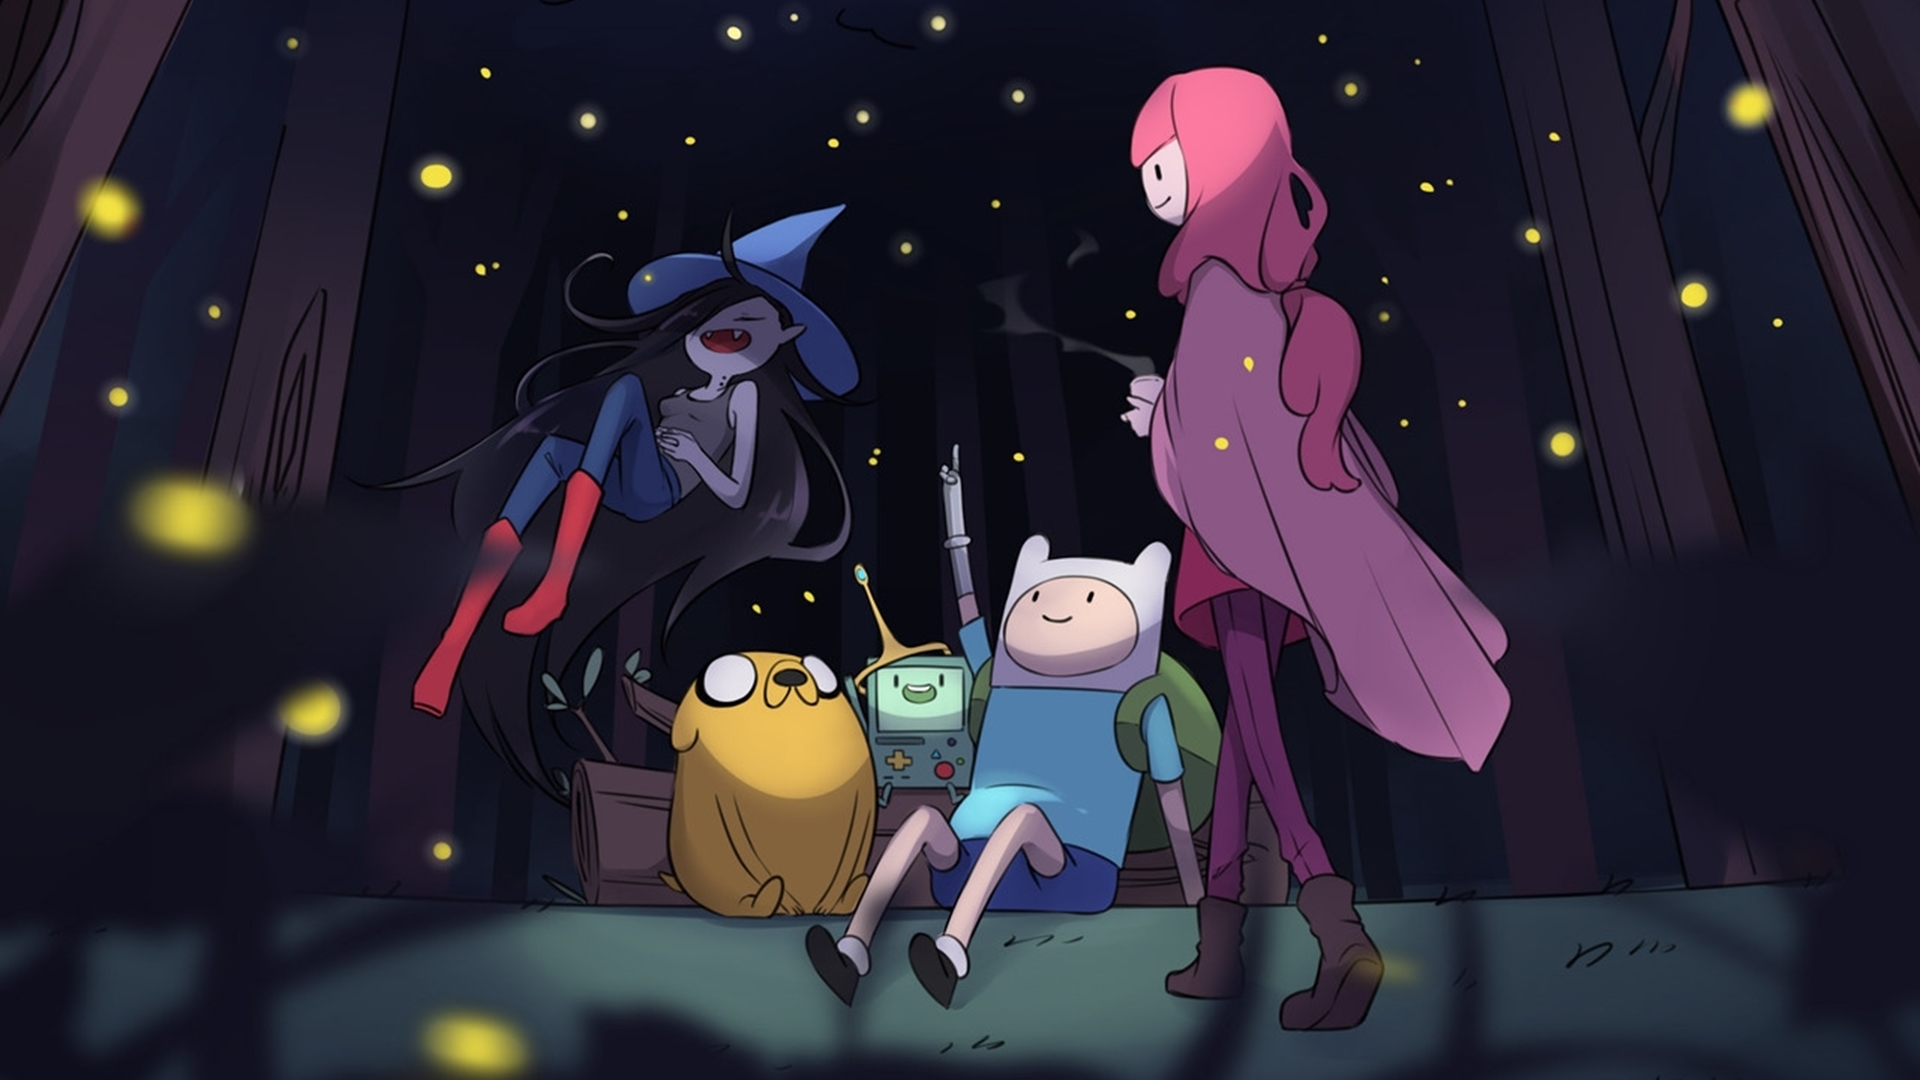 Cool Wallpapers adventure time, marceline (adventure time), bmo (adventure time), princess bubblegum, tv show, finn (adventure time), jake (adventure time)